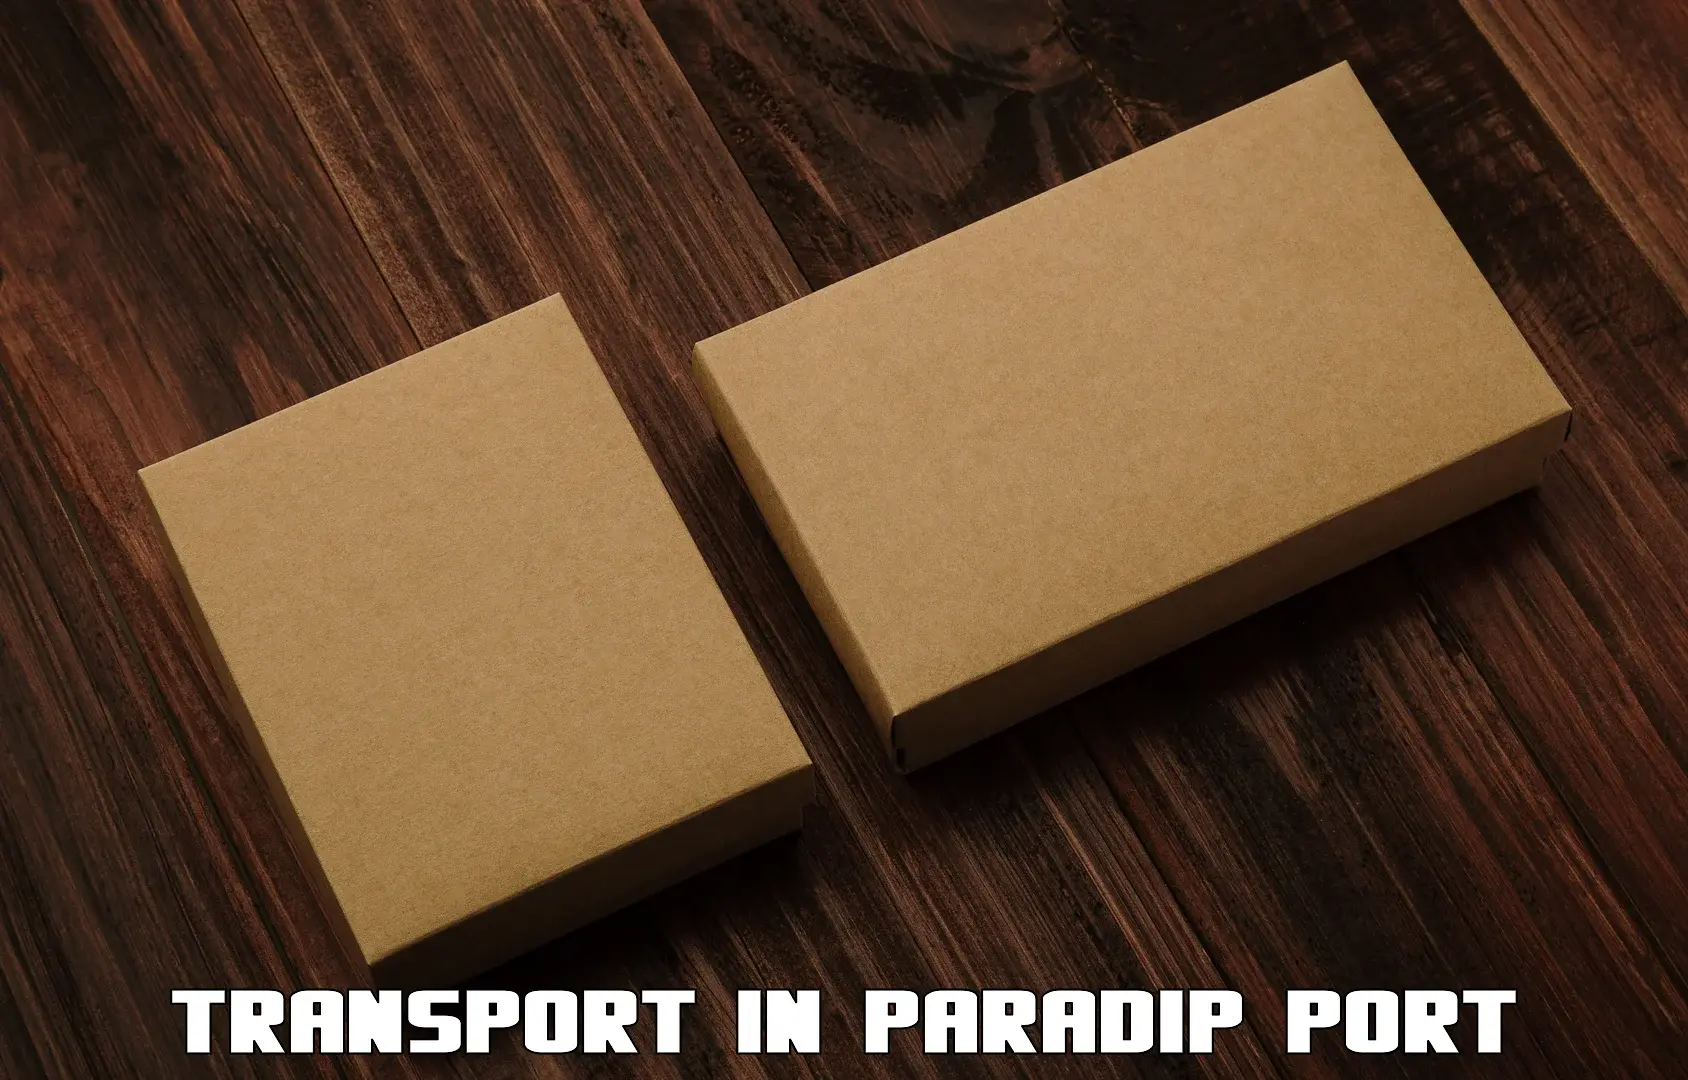 Commercial transport service in Paradip Port